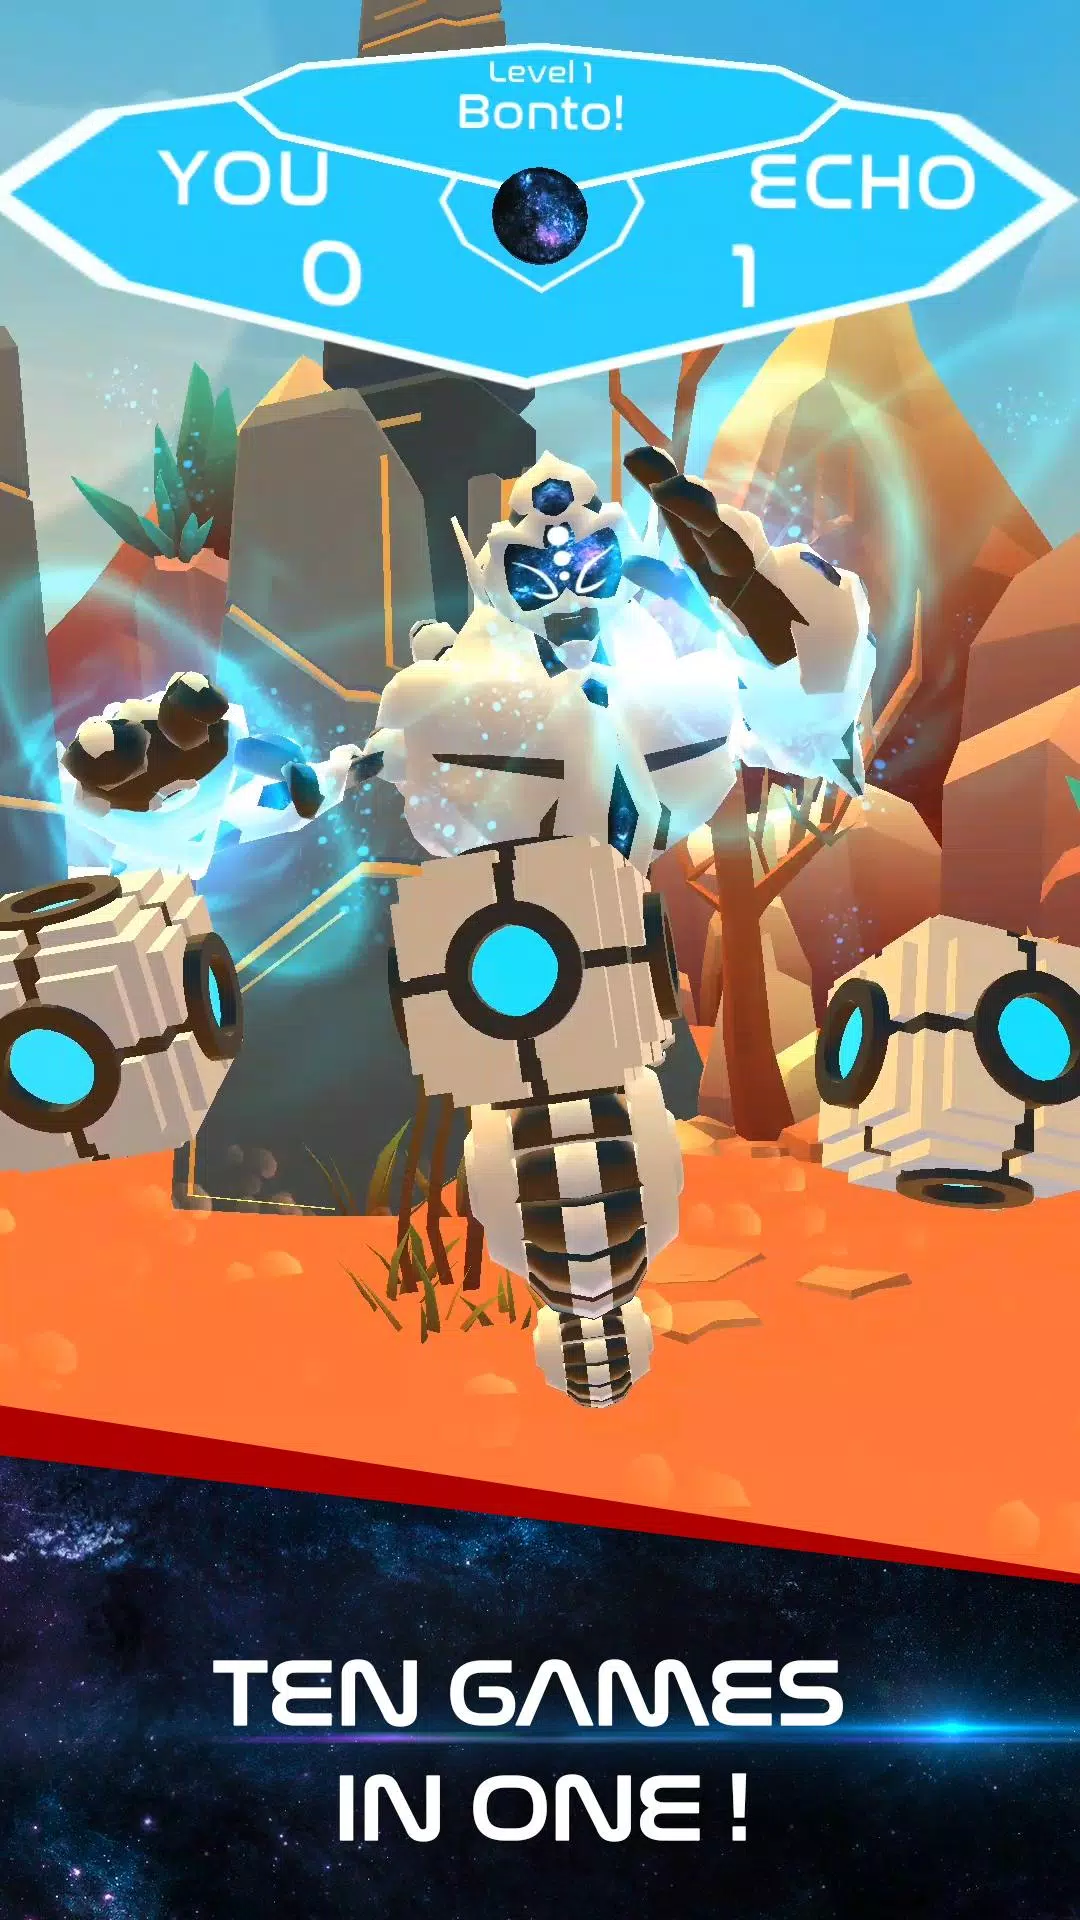 Echo Vr Cardboard Edition Mini Games Party (Unreleased) Apk For Android  Download